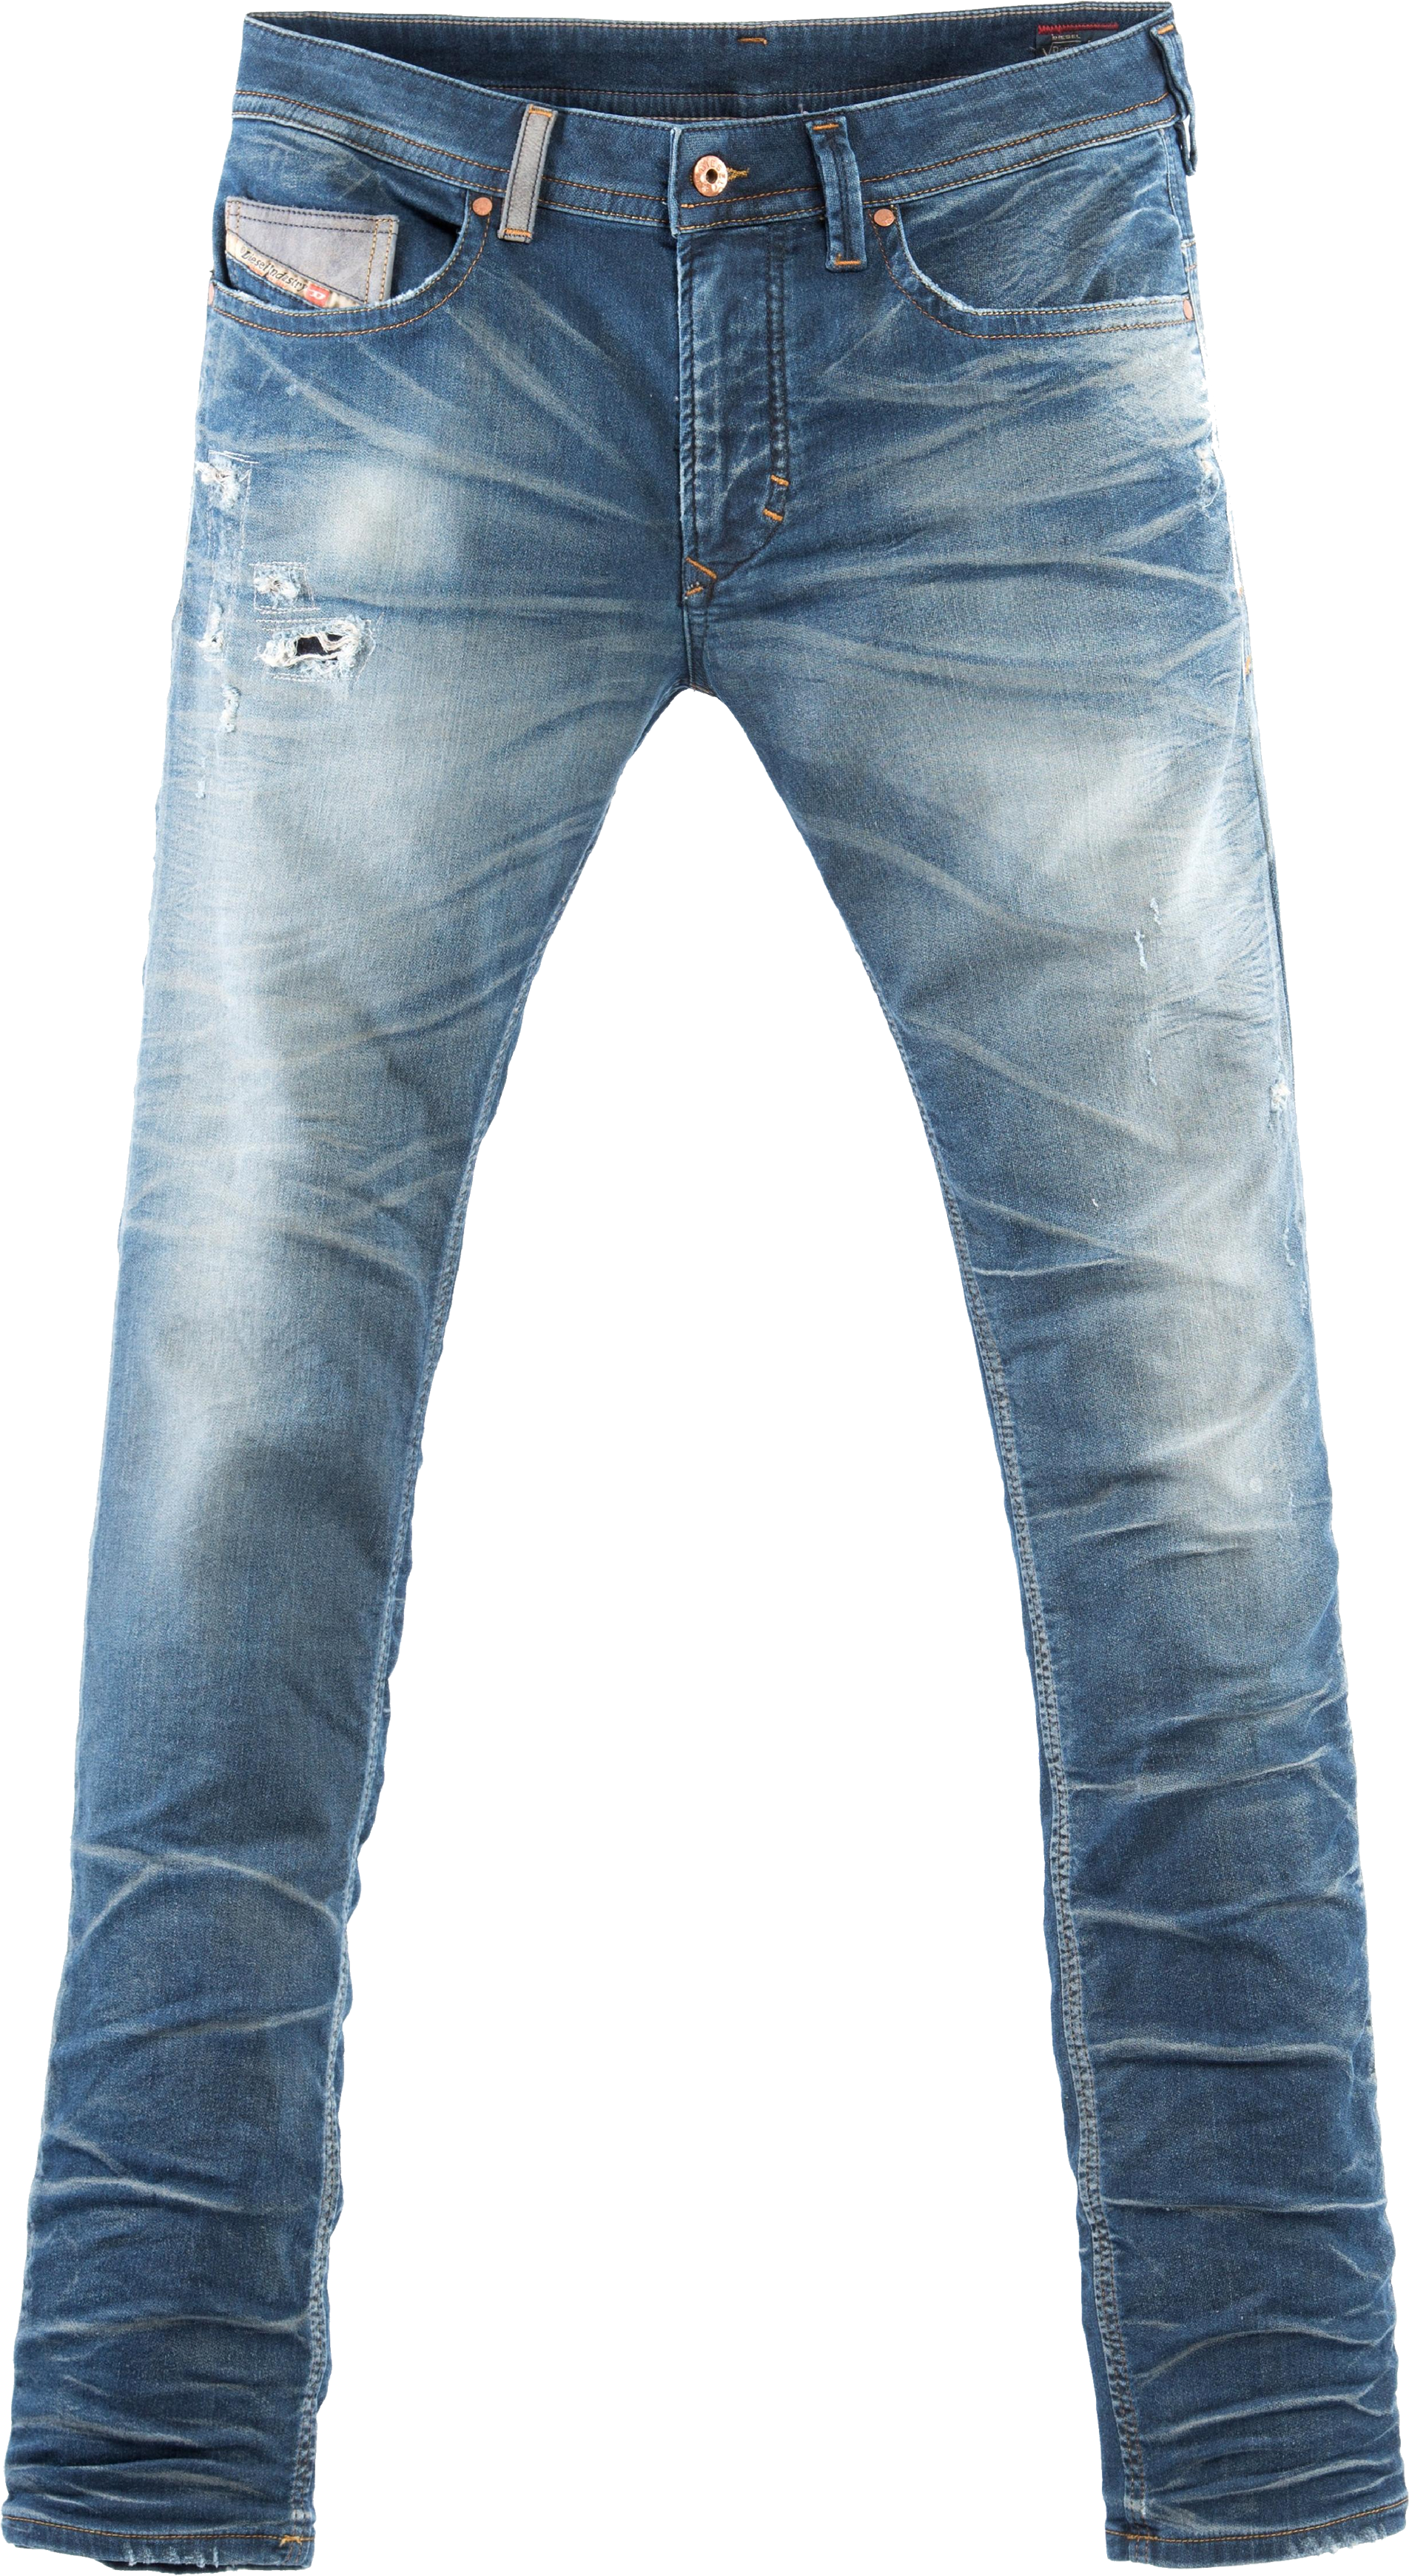 Mannen jeans PNG Afbeelding achtergrond